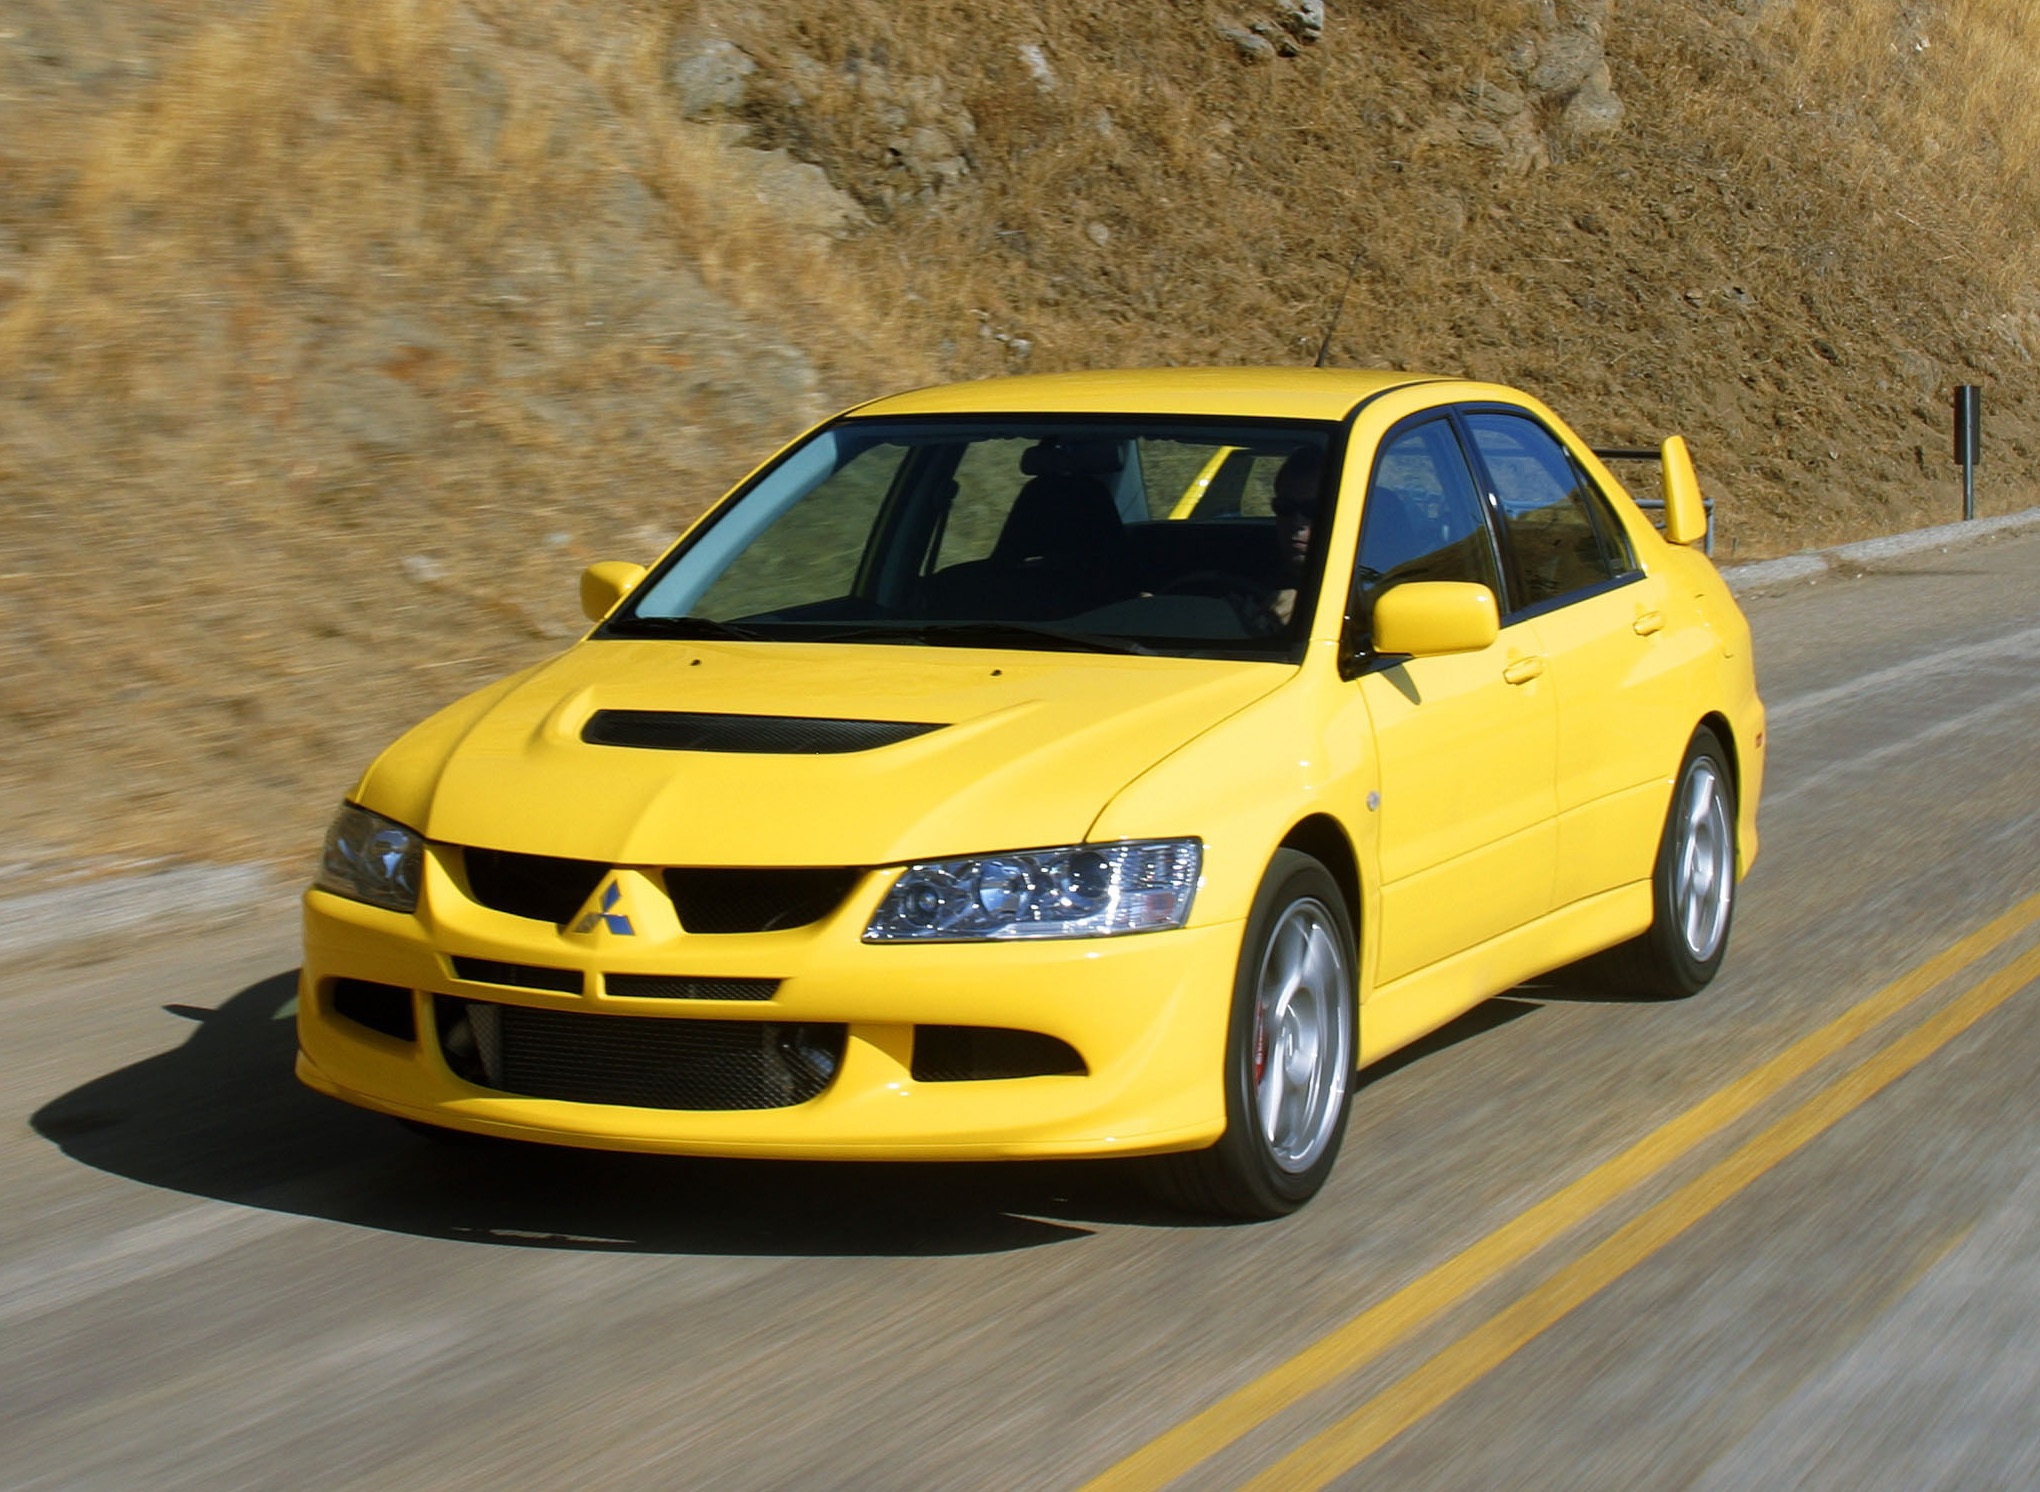 Mitsubishi Lancer Evolution Wallpapers Images Photos Pictures Backgrounds